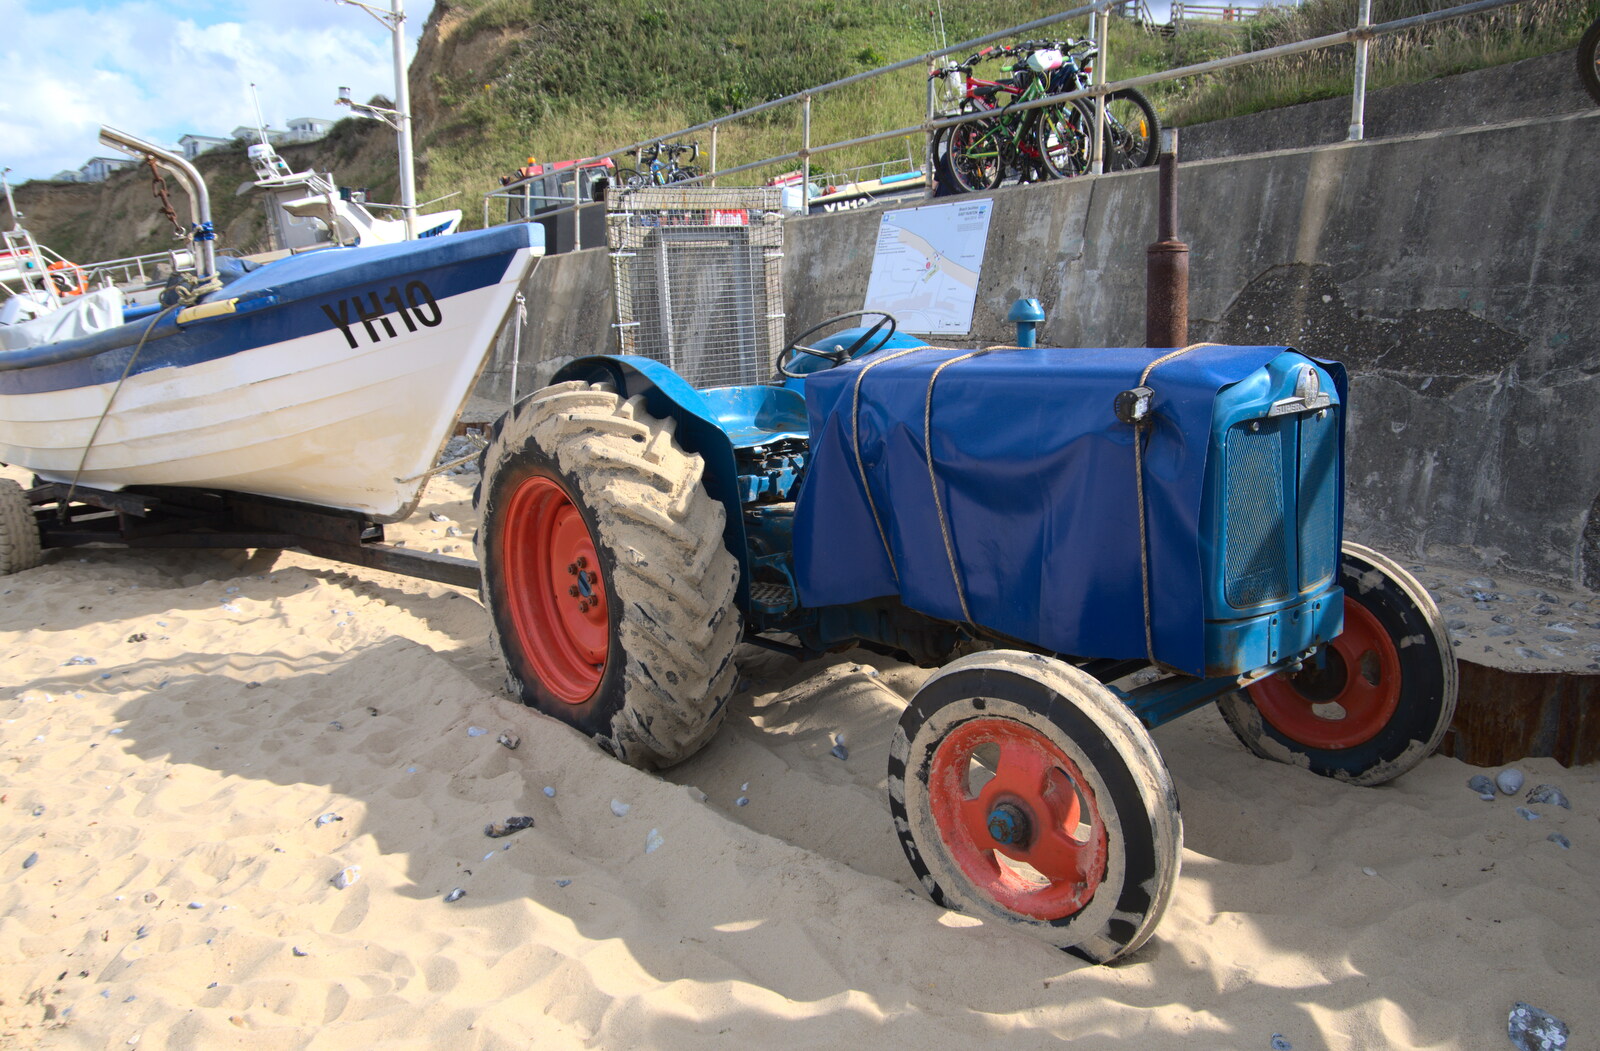 A rugged-up tractor from Camping on the Coast, East Runton, North Norfolk - 25th July 2020